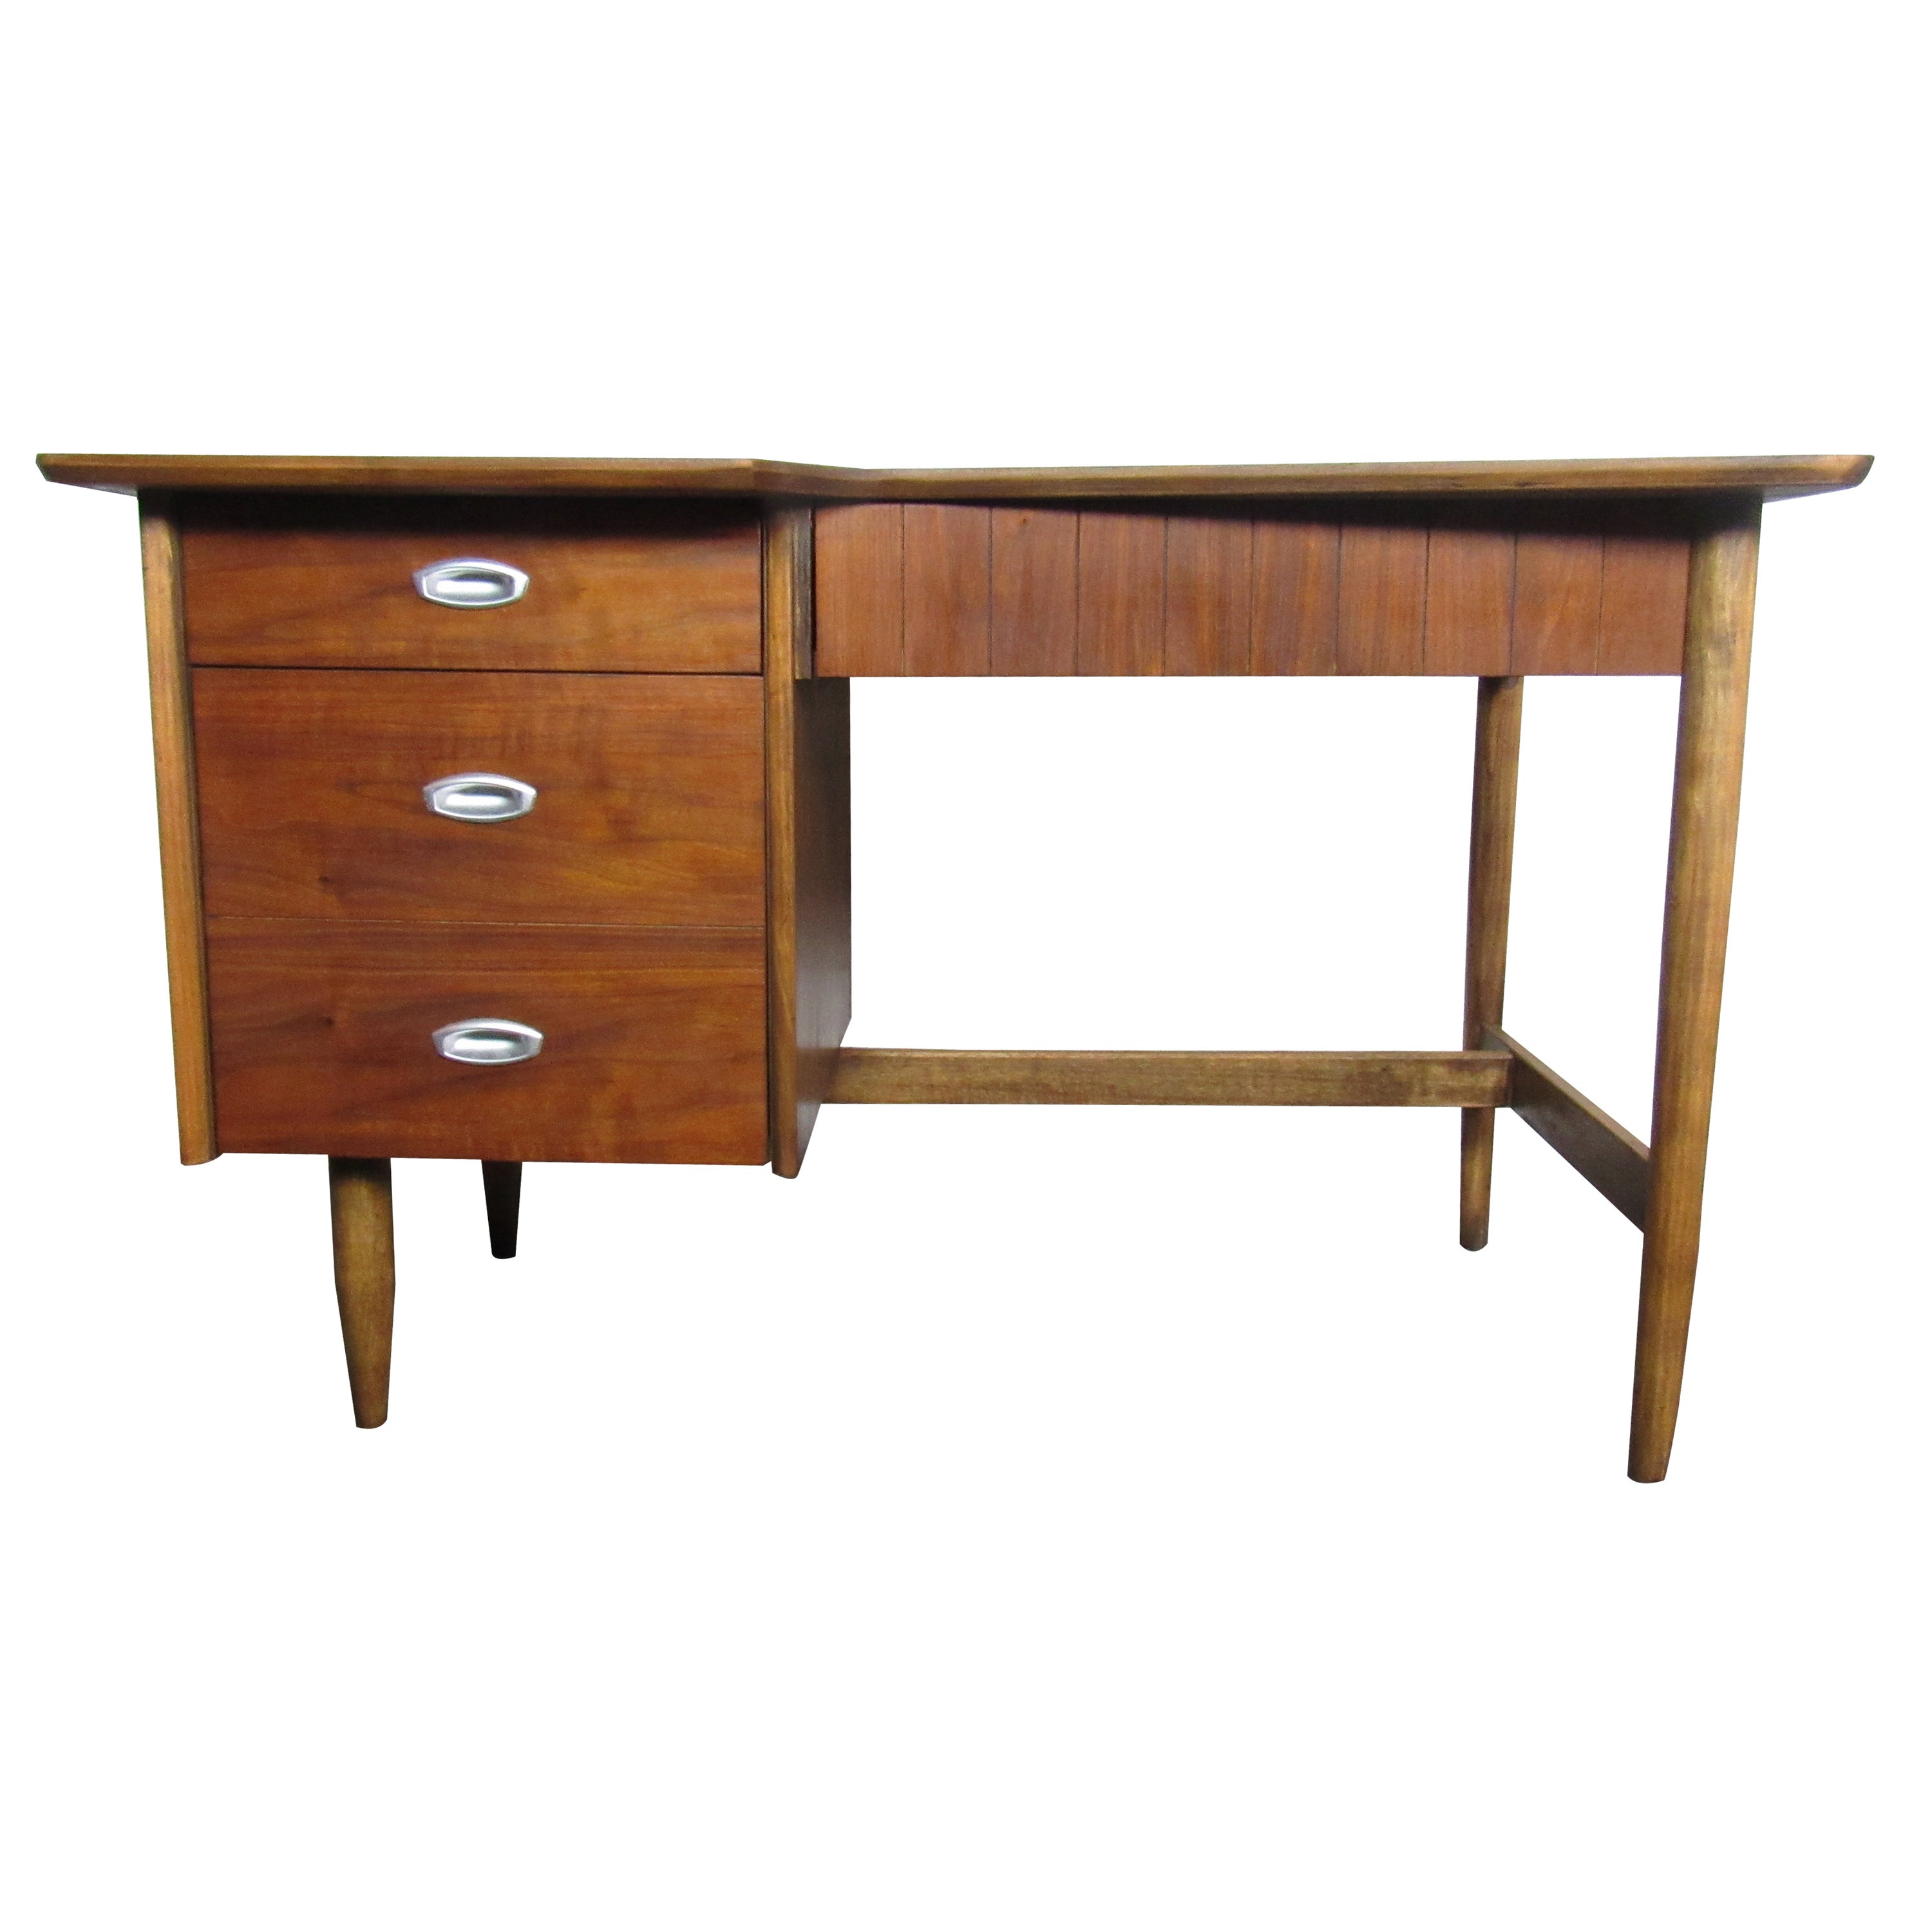 Arts wish White Writing Desk with Drawers Mid Century Modern Desk, Wood  Office Desk Computer Desk Vanity Desk for Small Space, White Desk with  Walnut